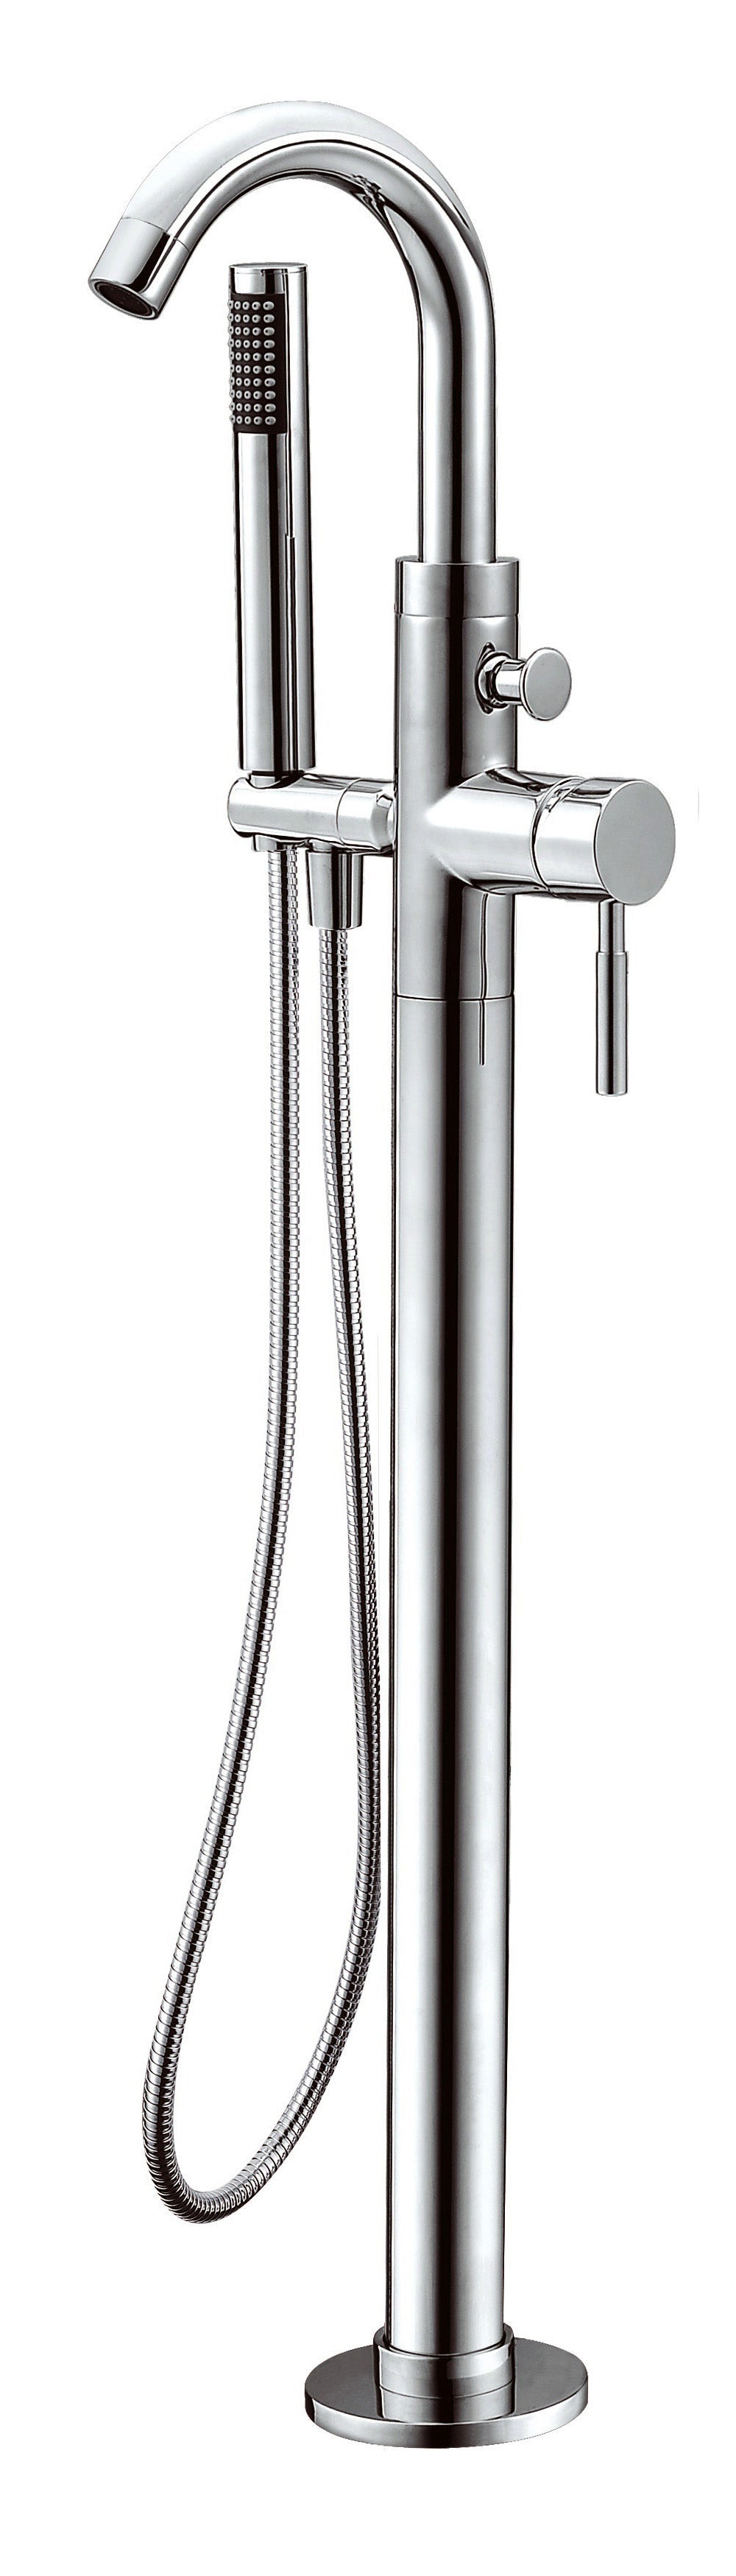 ALFI | AB2534-PC Brushed Nickel Single Lever Floor Mounted Tub Filler Mixer w Hand Held Shower Head